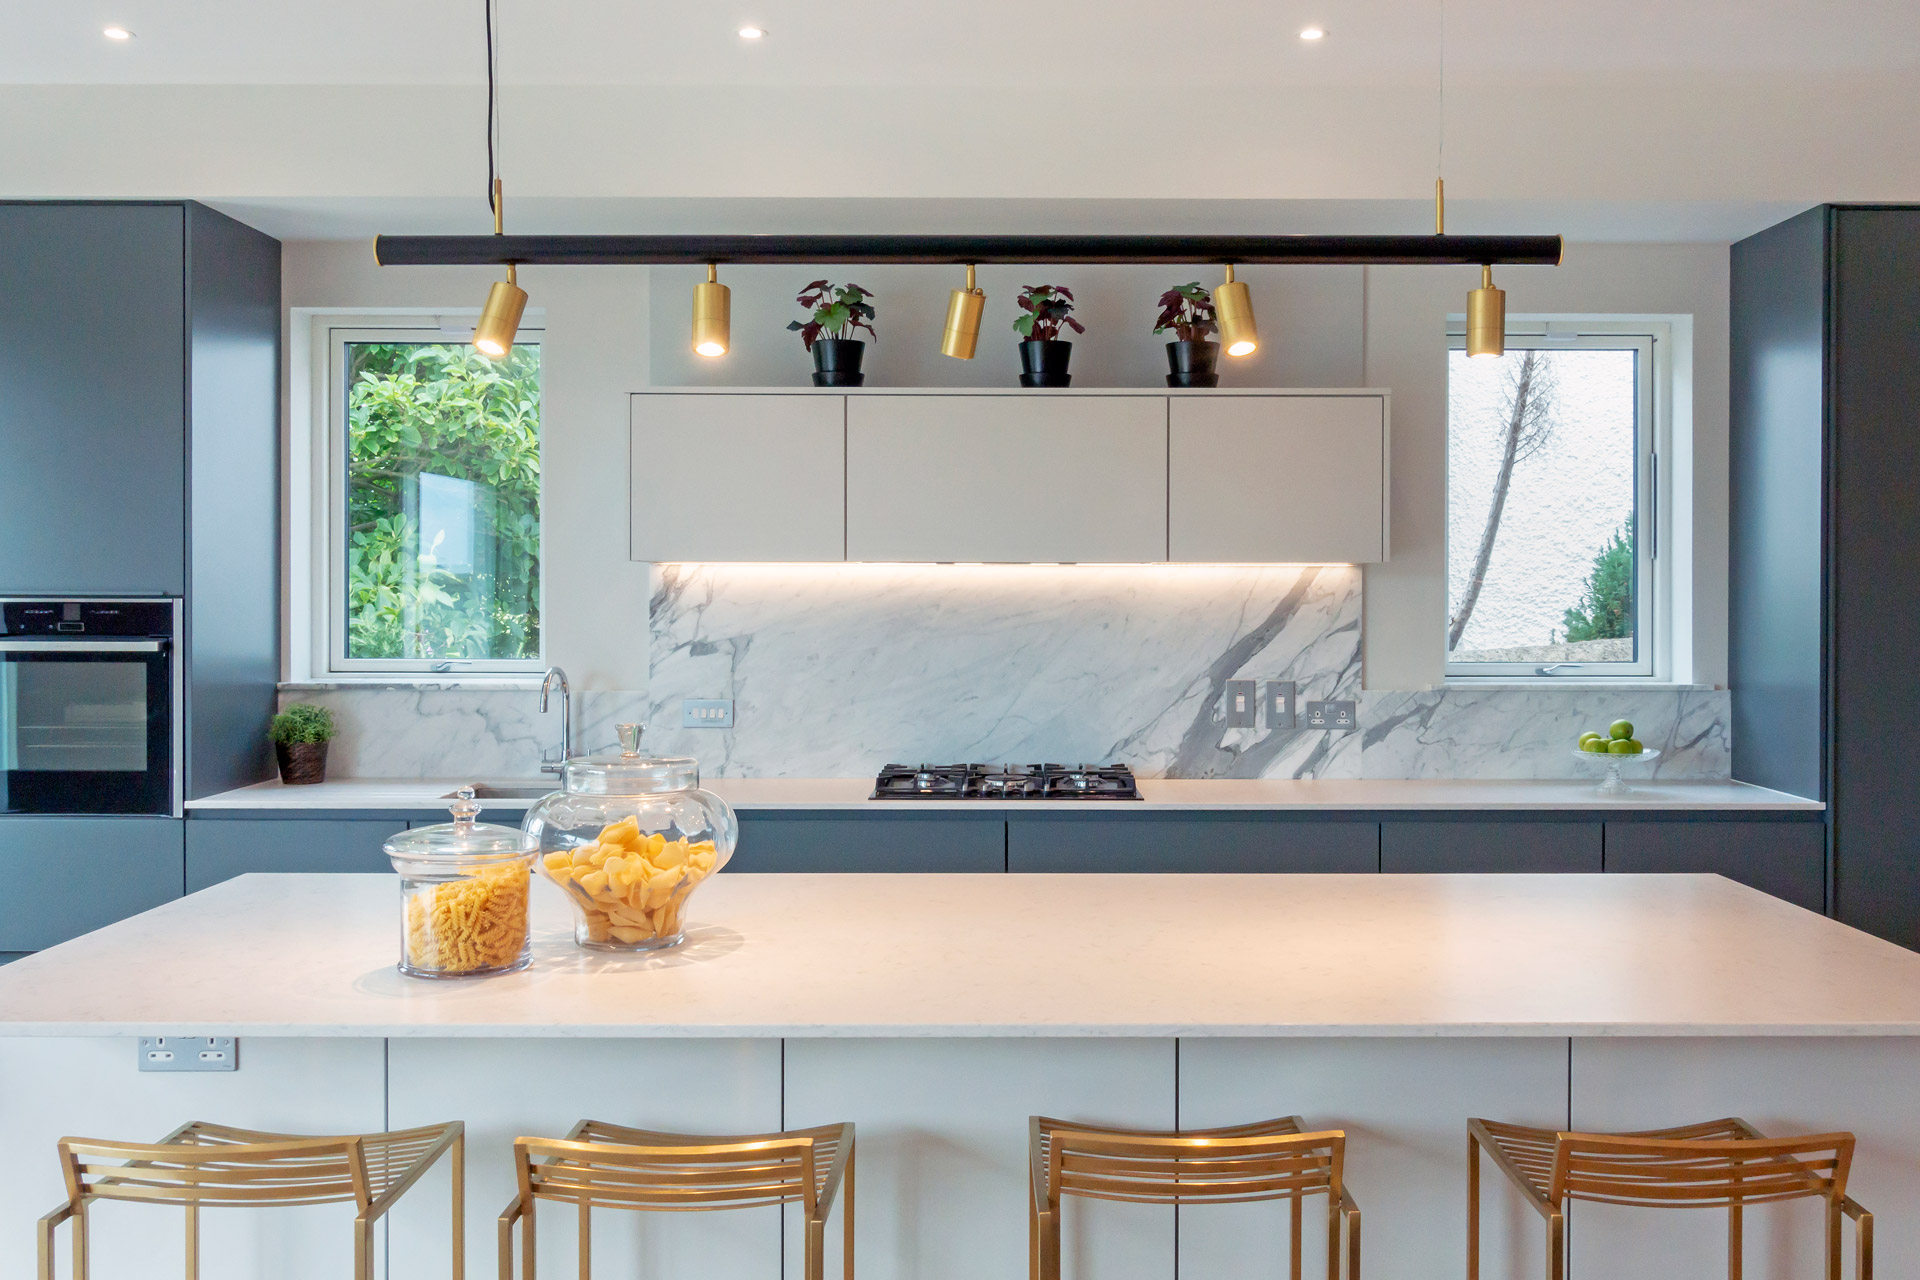 We manufactured this bespoke kitchen island bar pendant for this luxurious Dublin home